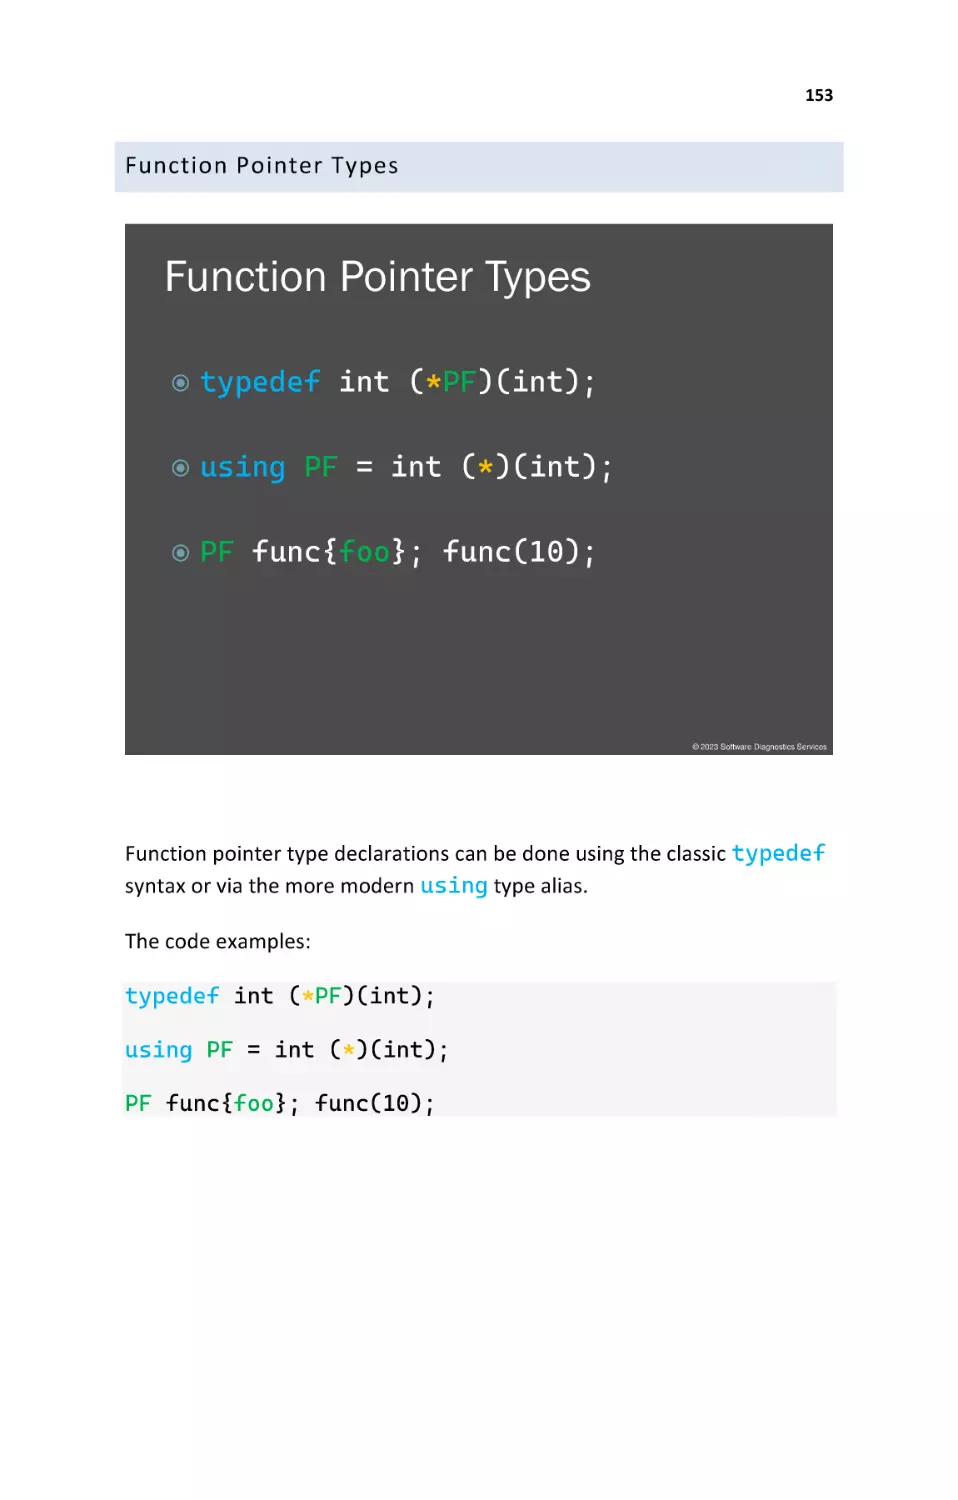 Function Pointer Types